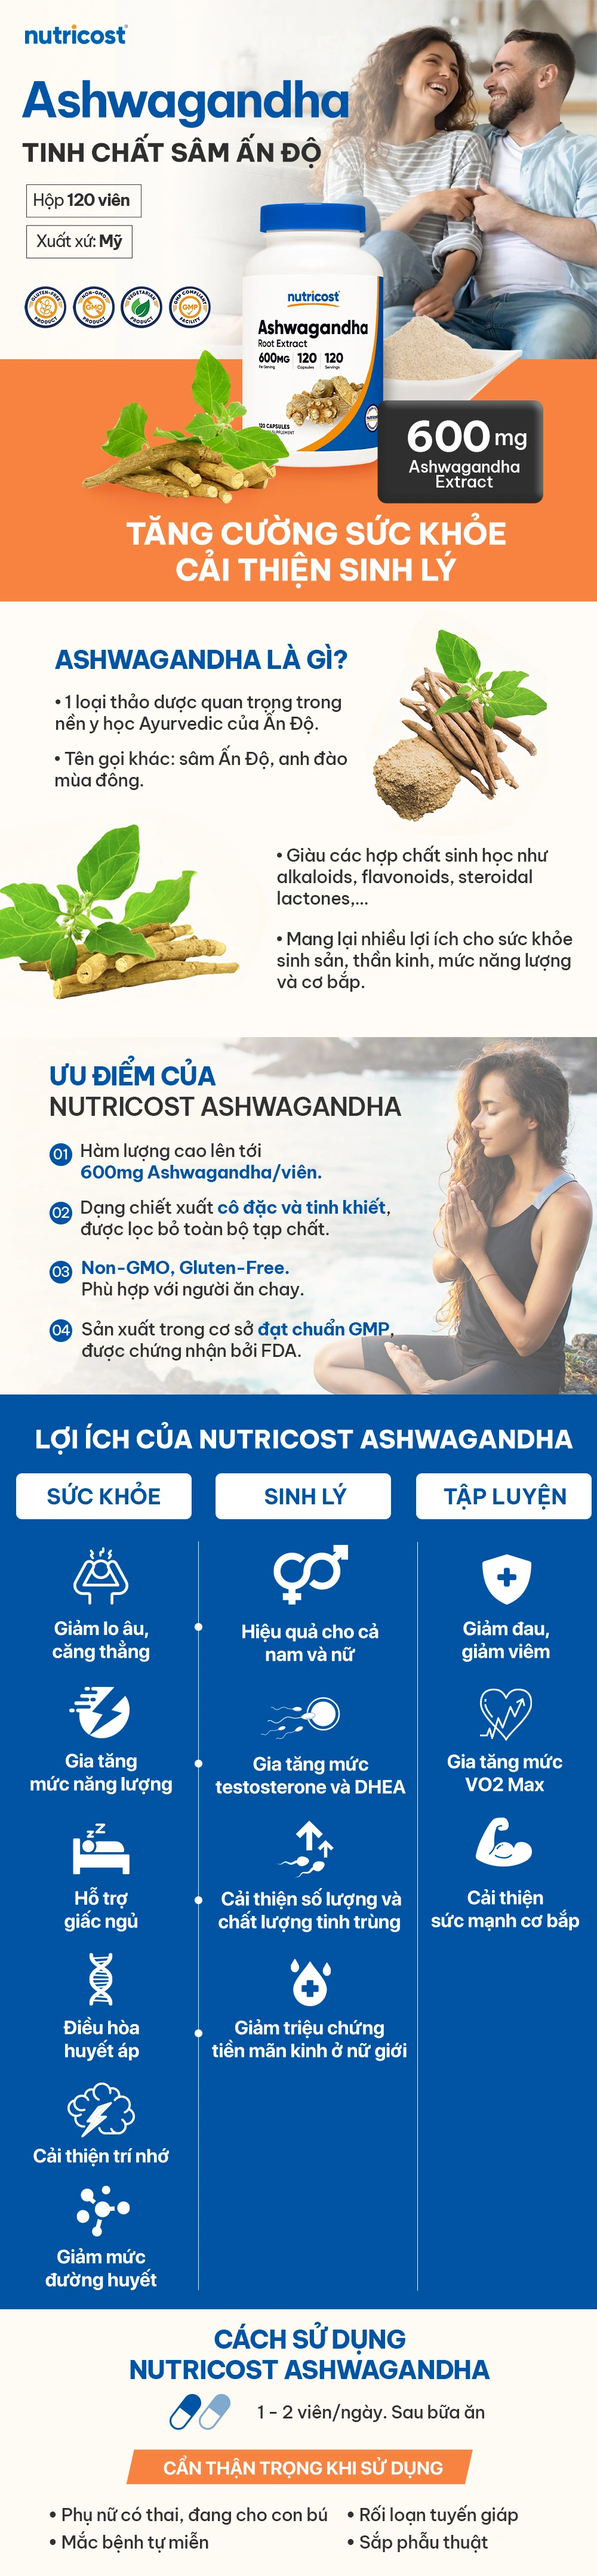 nutricost-ashwagandha-120-capsules-ho-tro-sinh-ly-gymstore